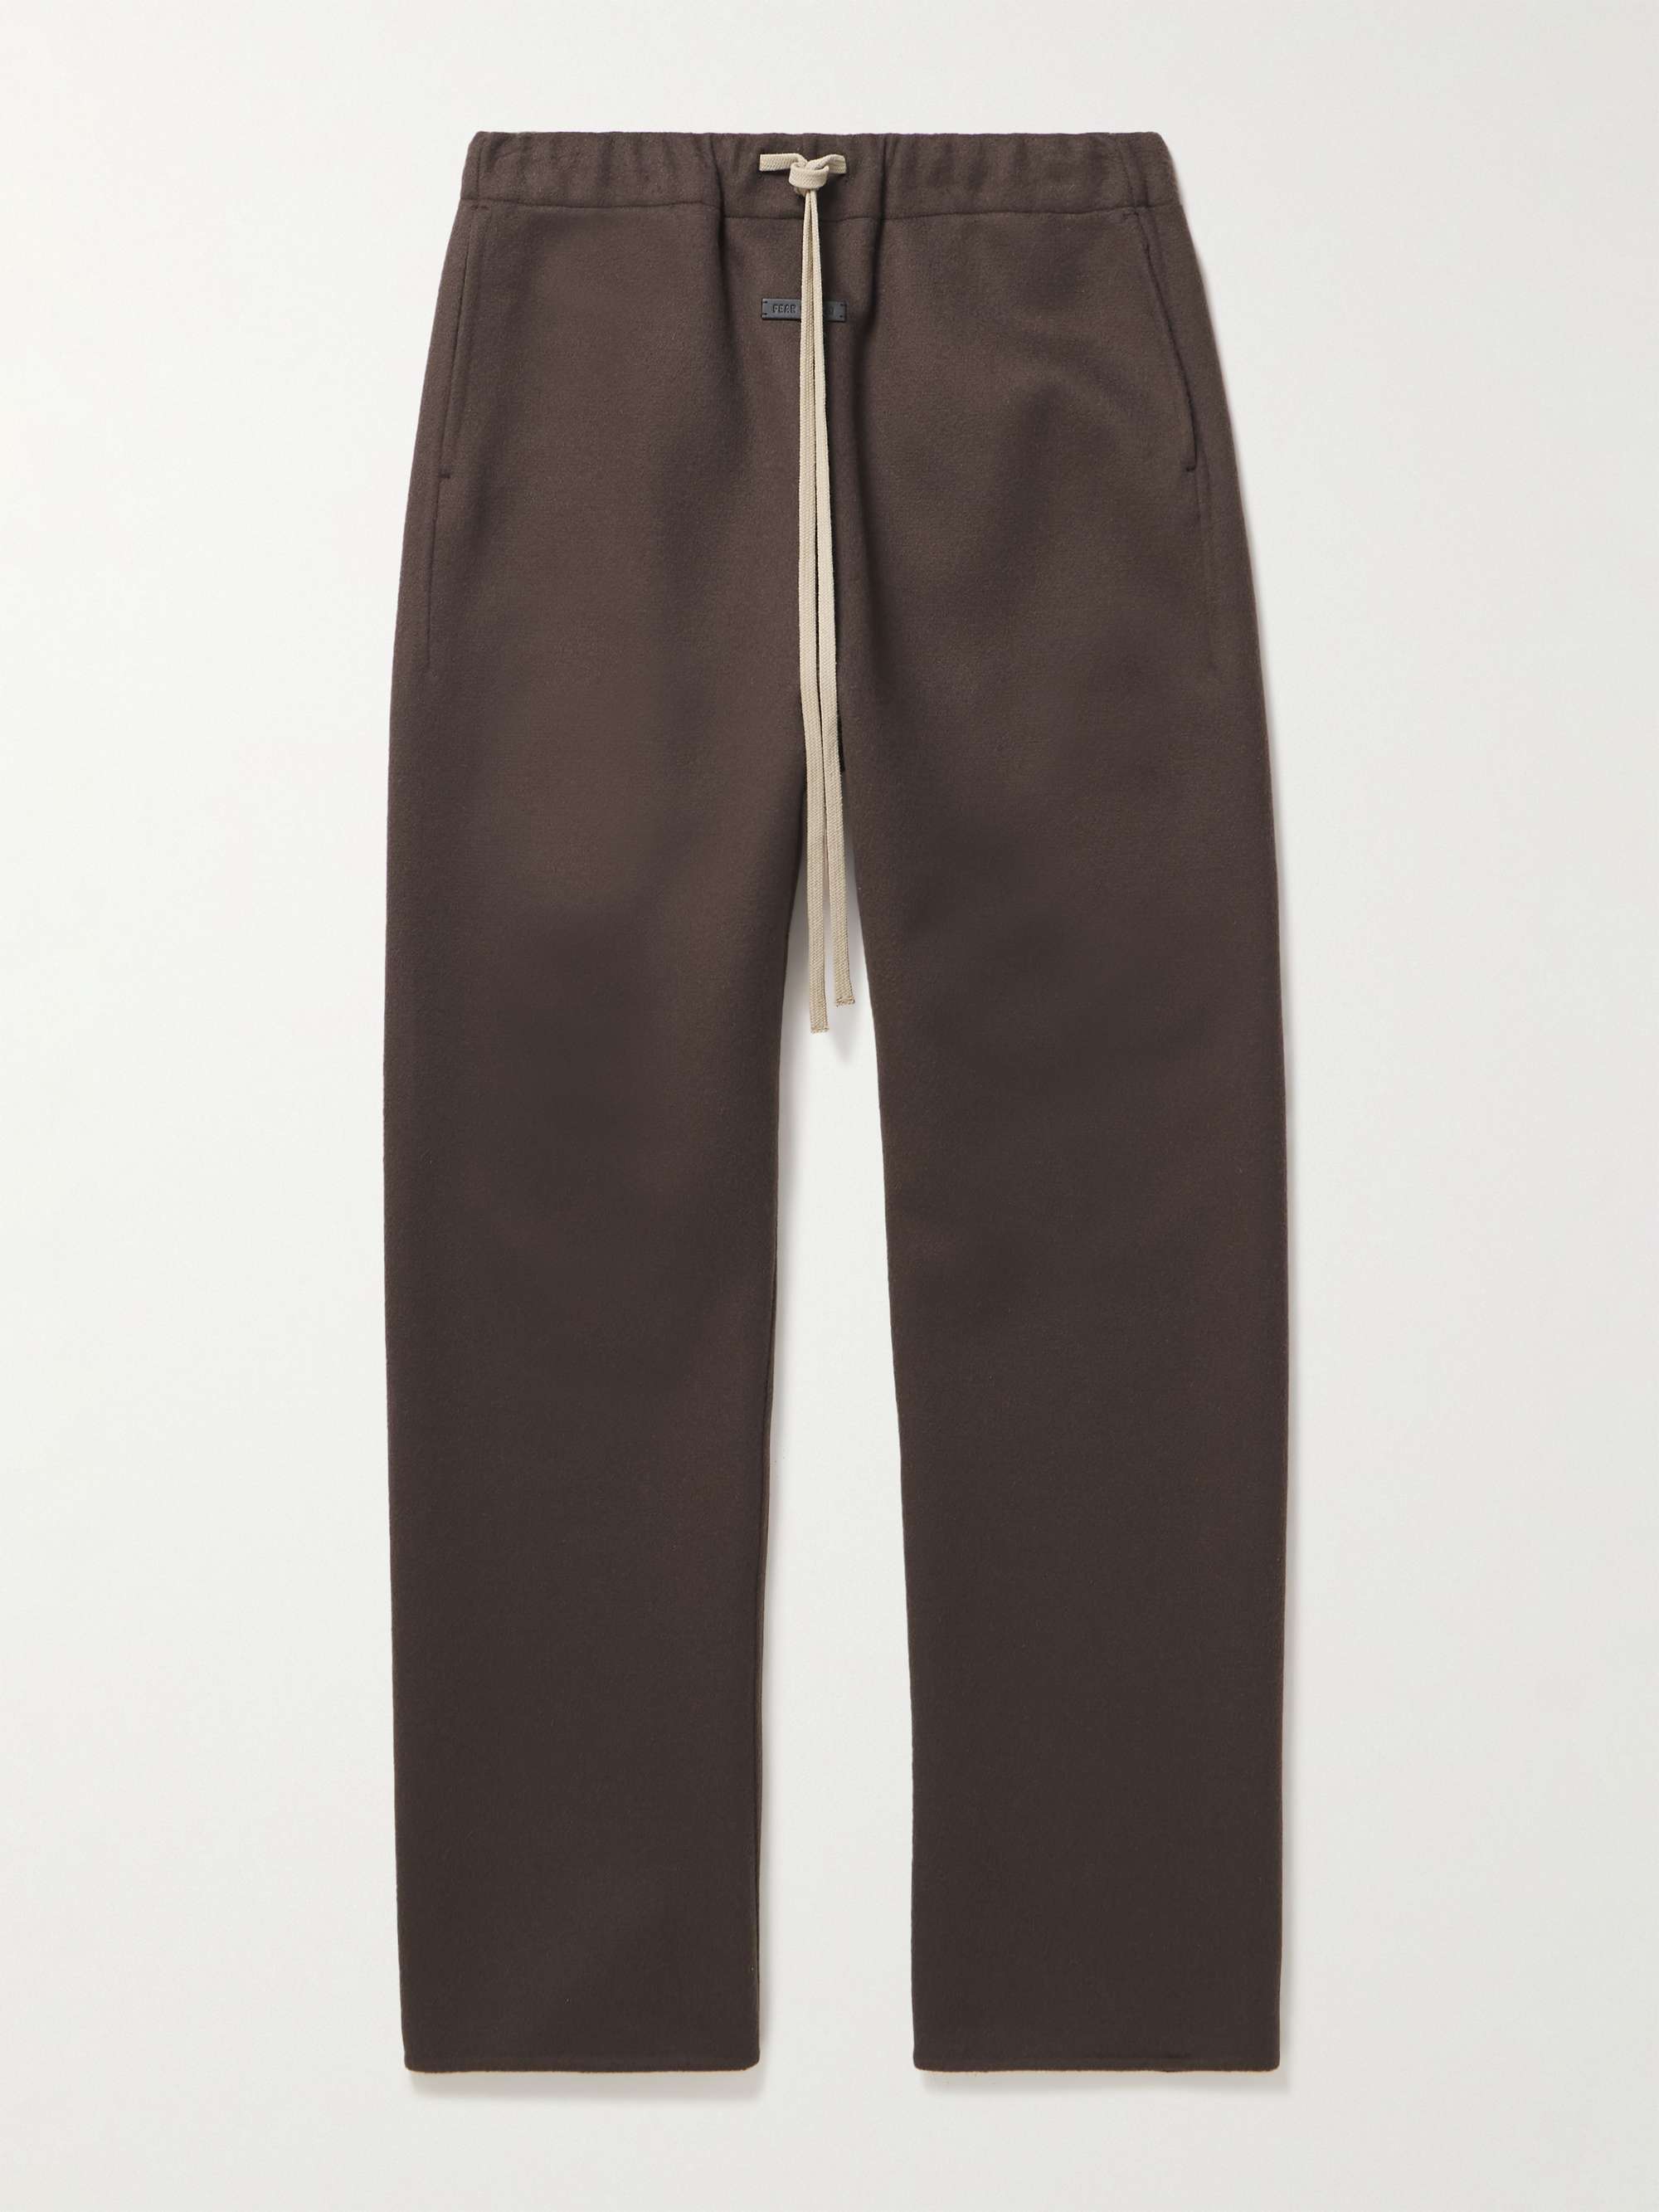 FEAR OF GOD Eternal Tapered Wool and Cashmere-Blend Sweatpants